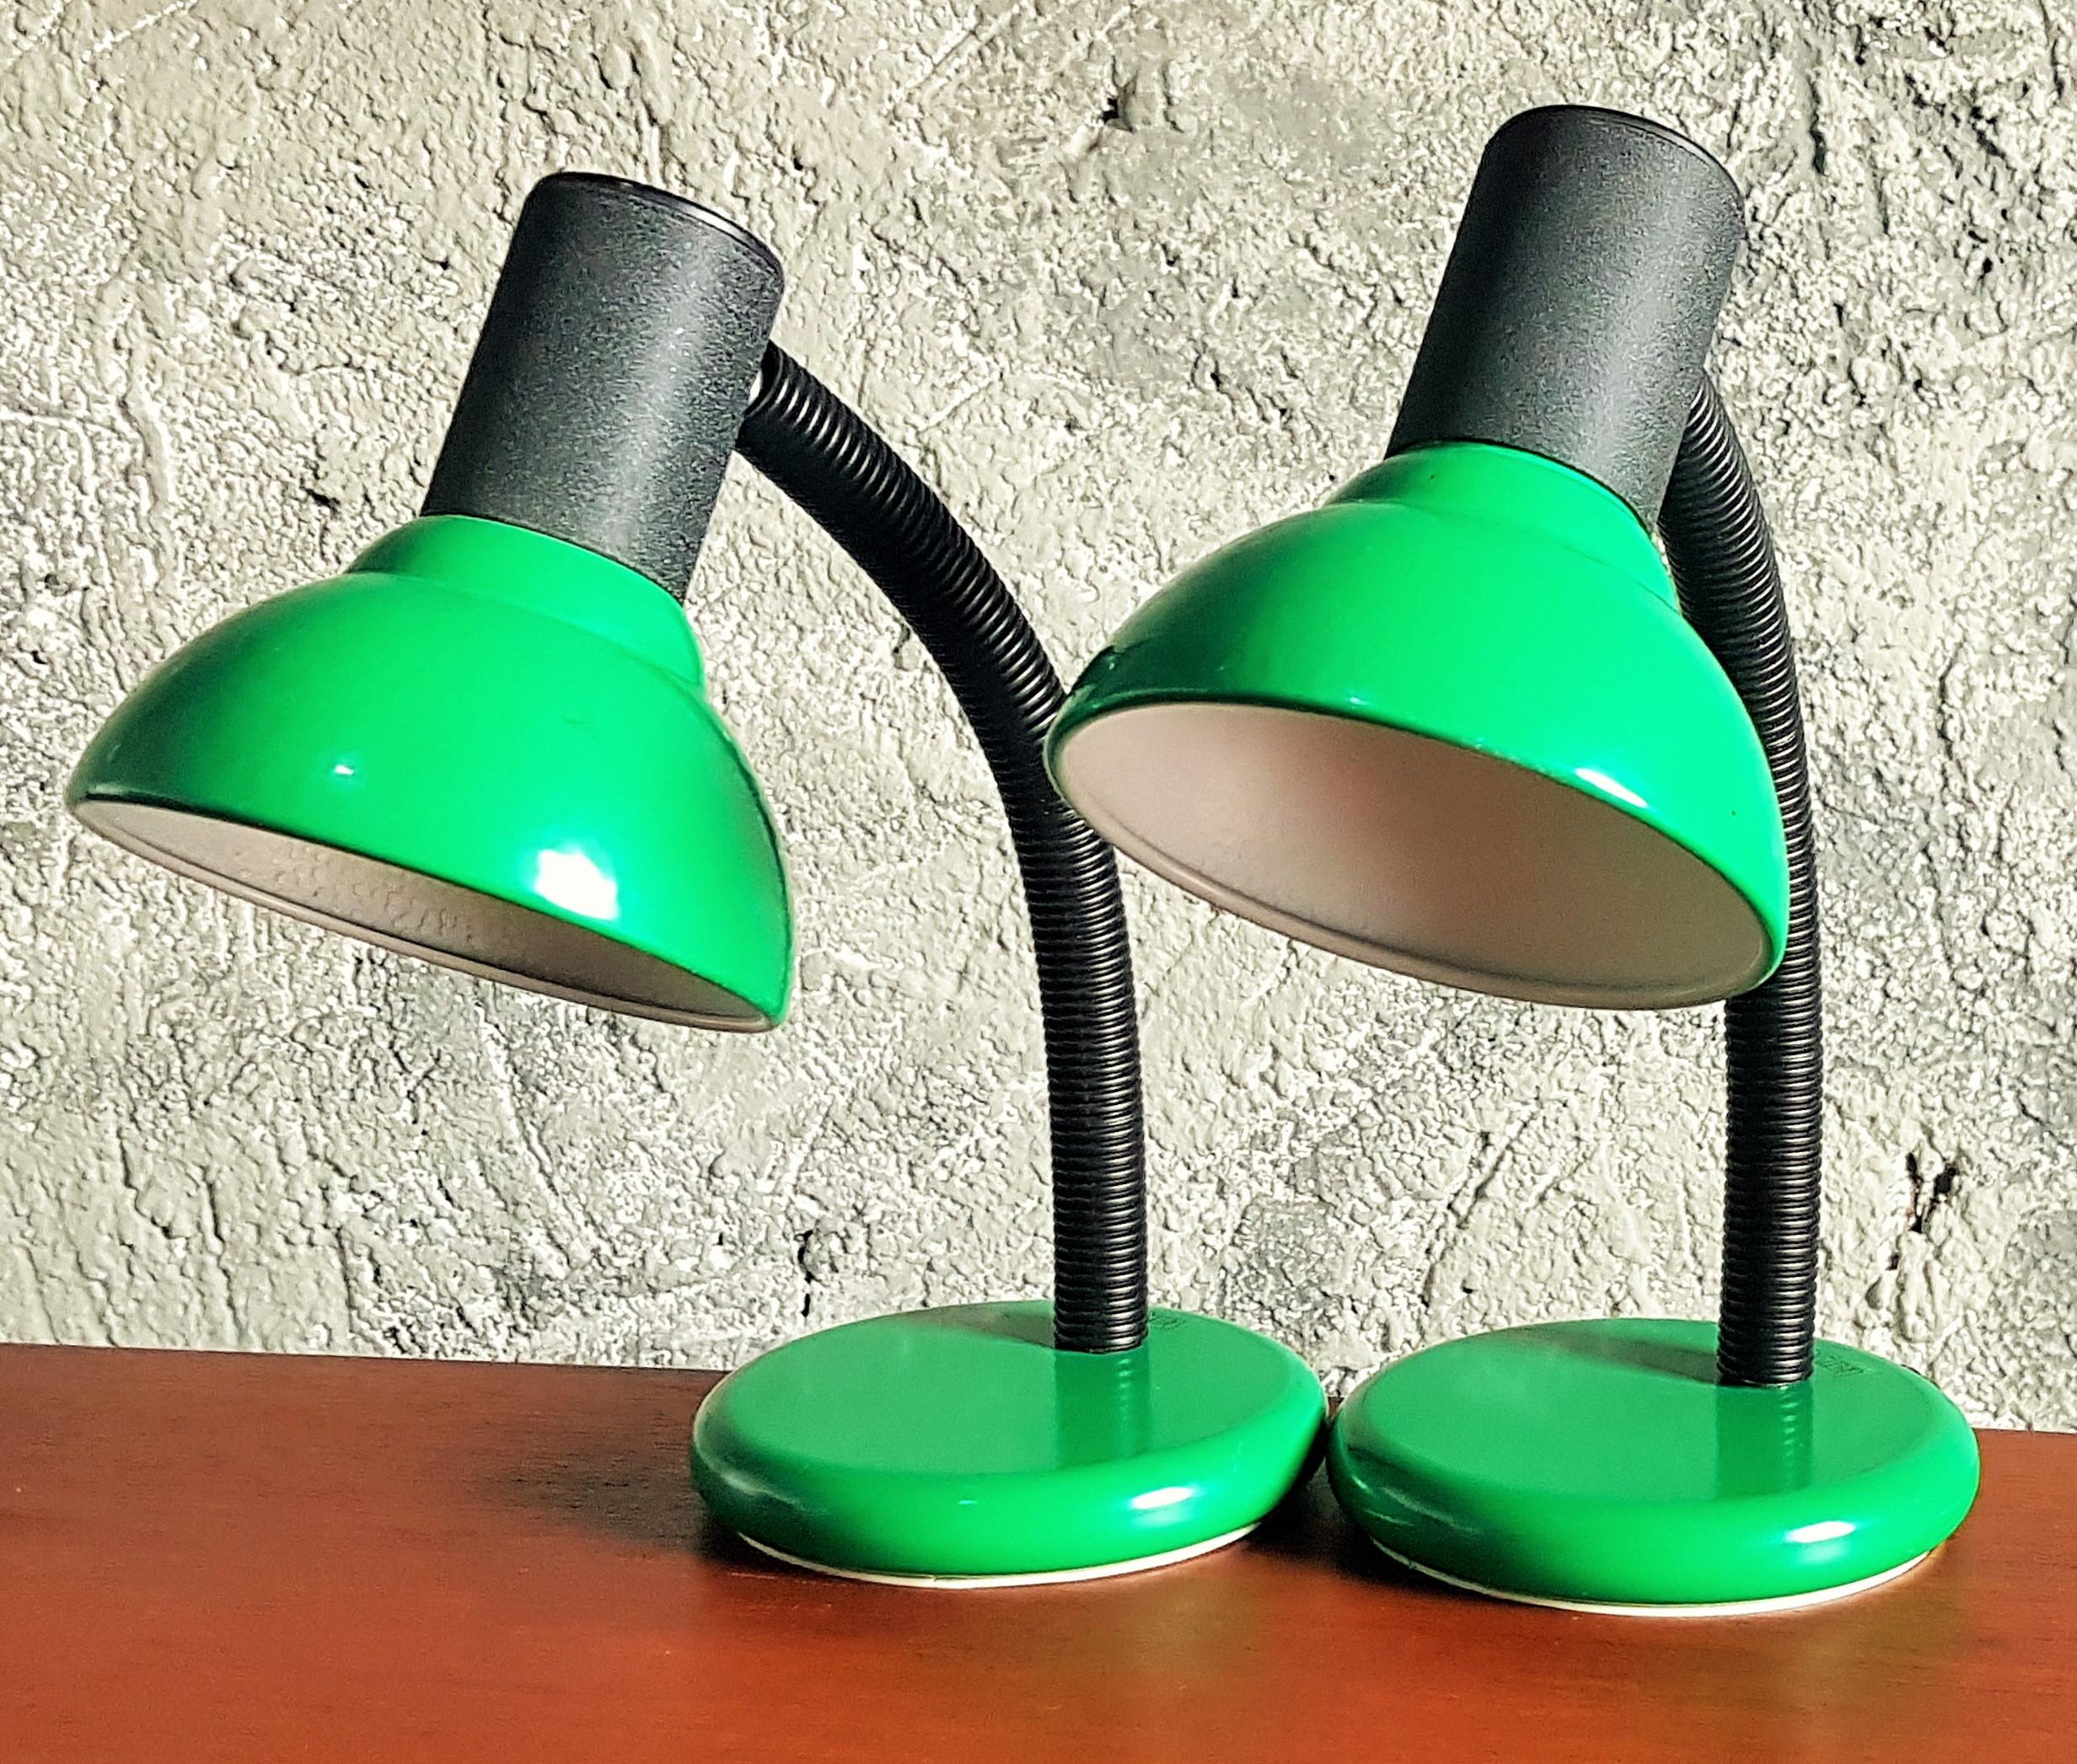 Metal Post-Modern Midcentury Pair of Table Desk Lamps, Targetti, Italy, 1982 For Sale